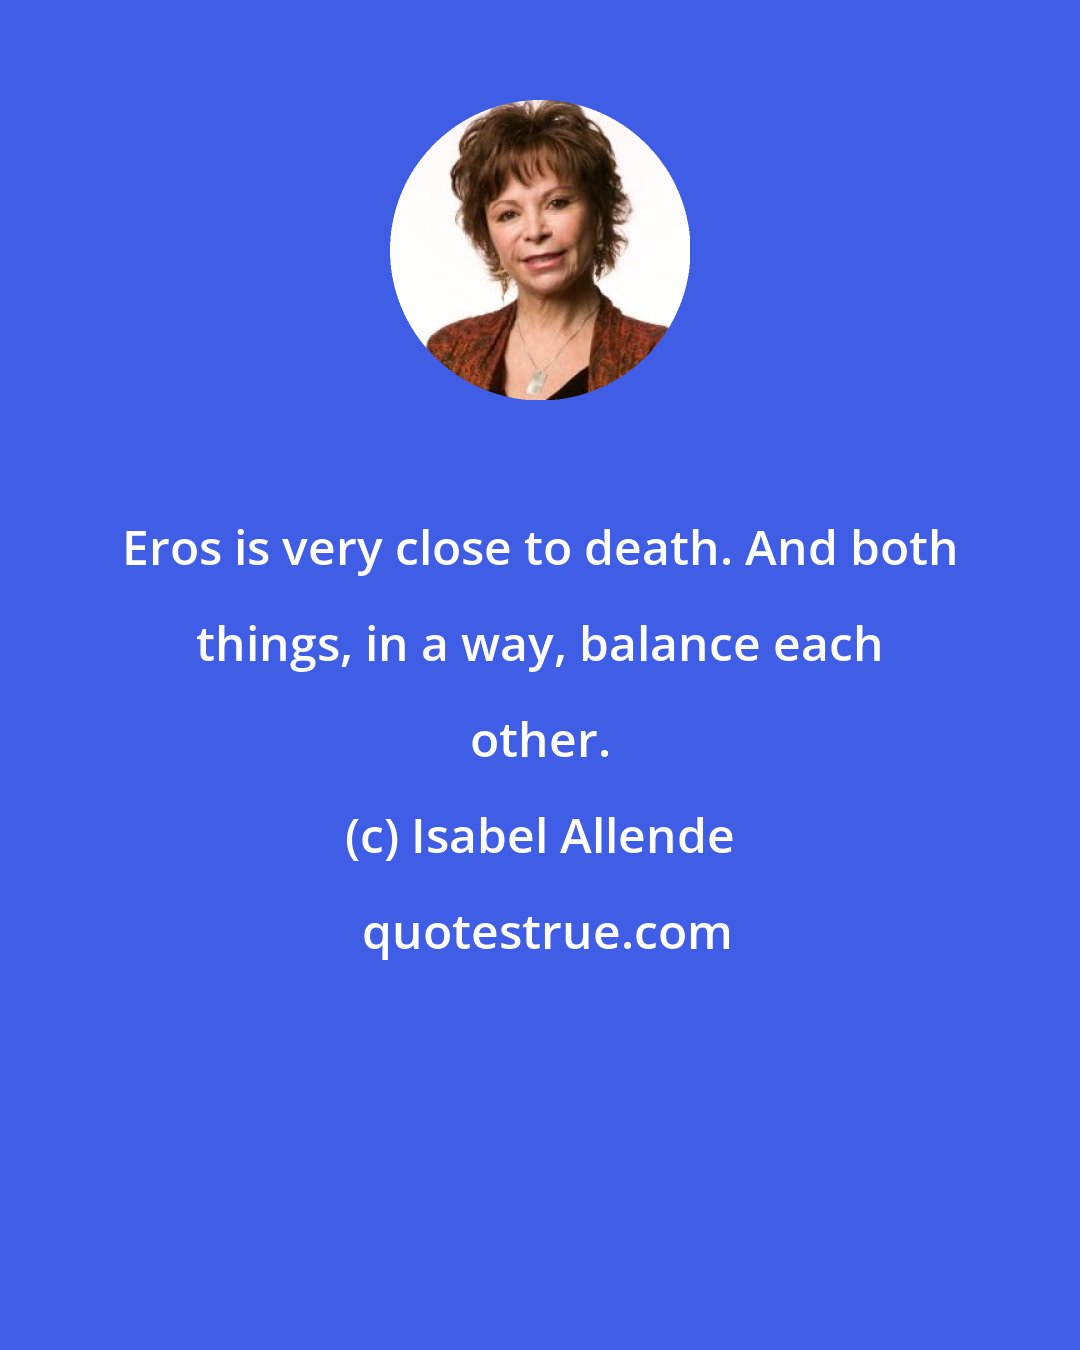 Isabel Allende: Eros is very close to death. And both things, in a way, balance each other.